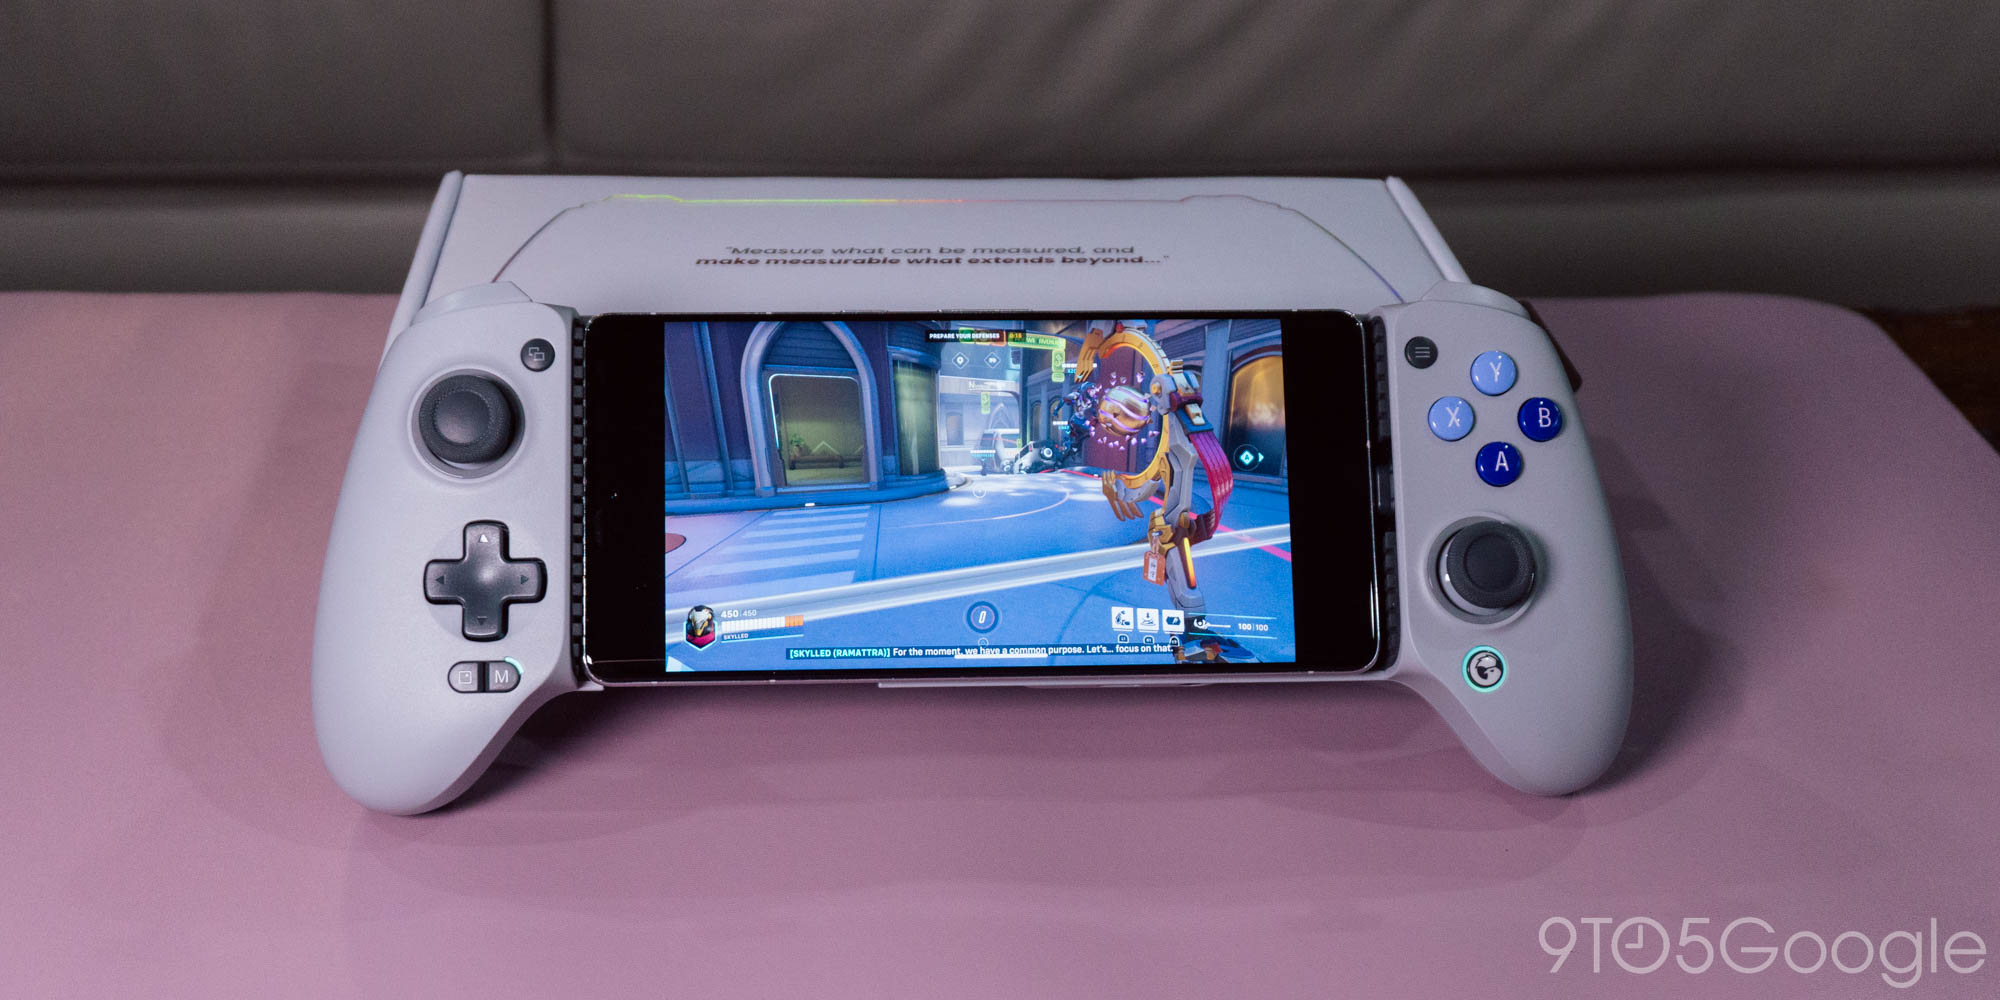 The GameSir G8 Galileo is great for PS Remote Play - GadgetMatch